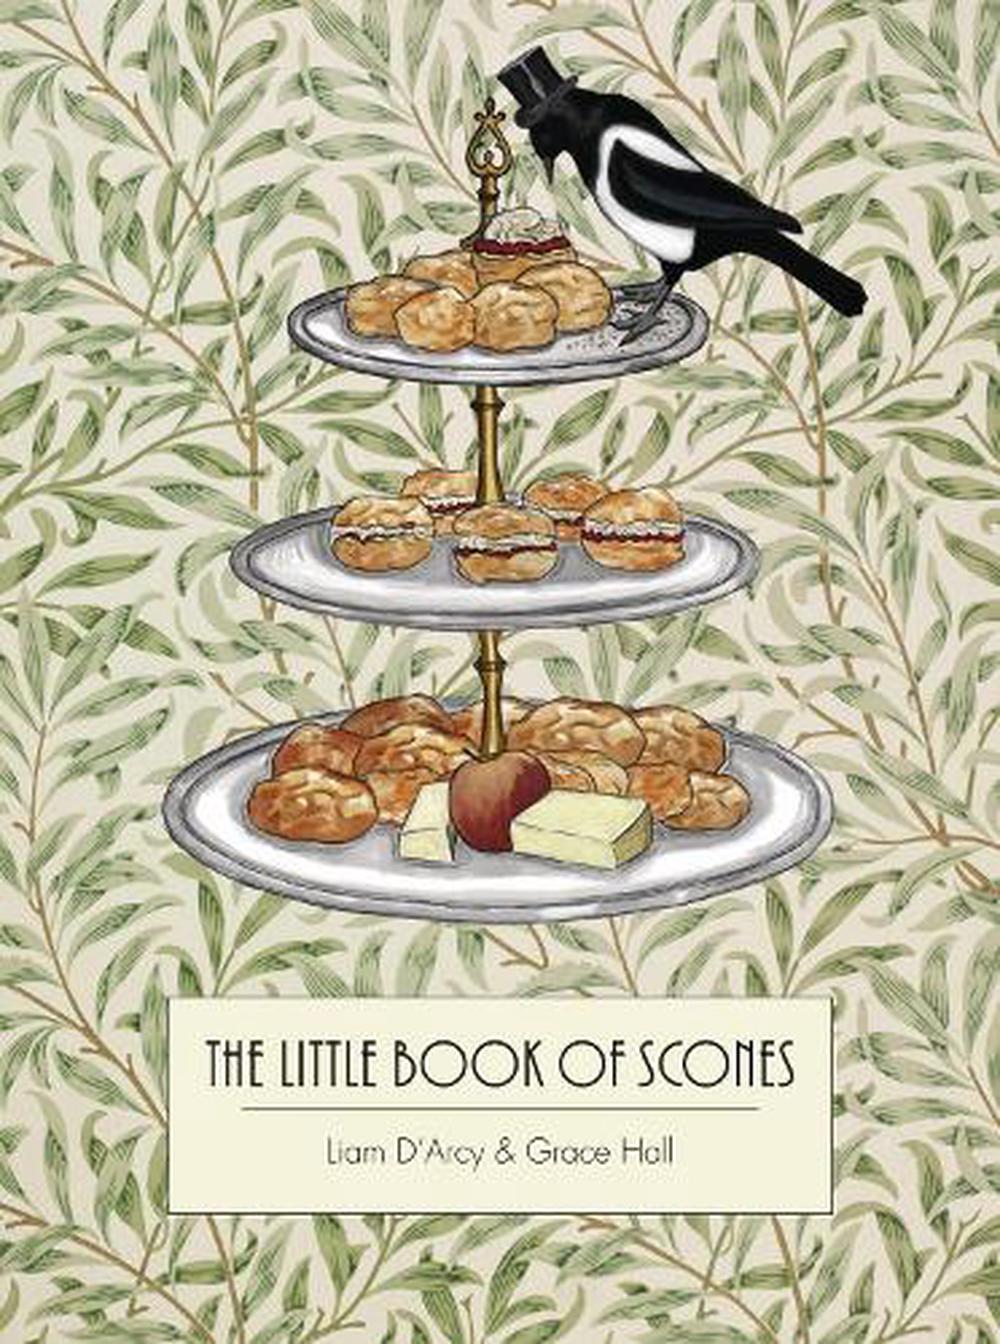 scones and sensibility by lindsay eland